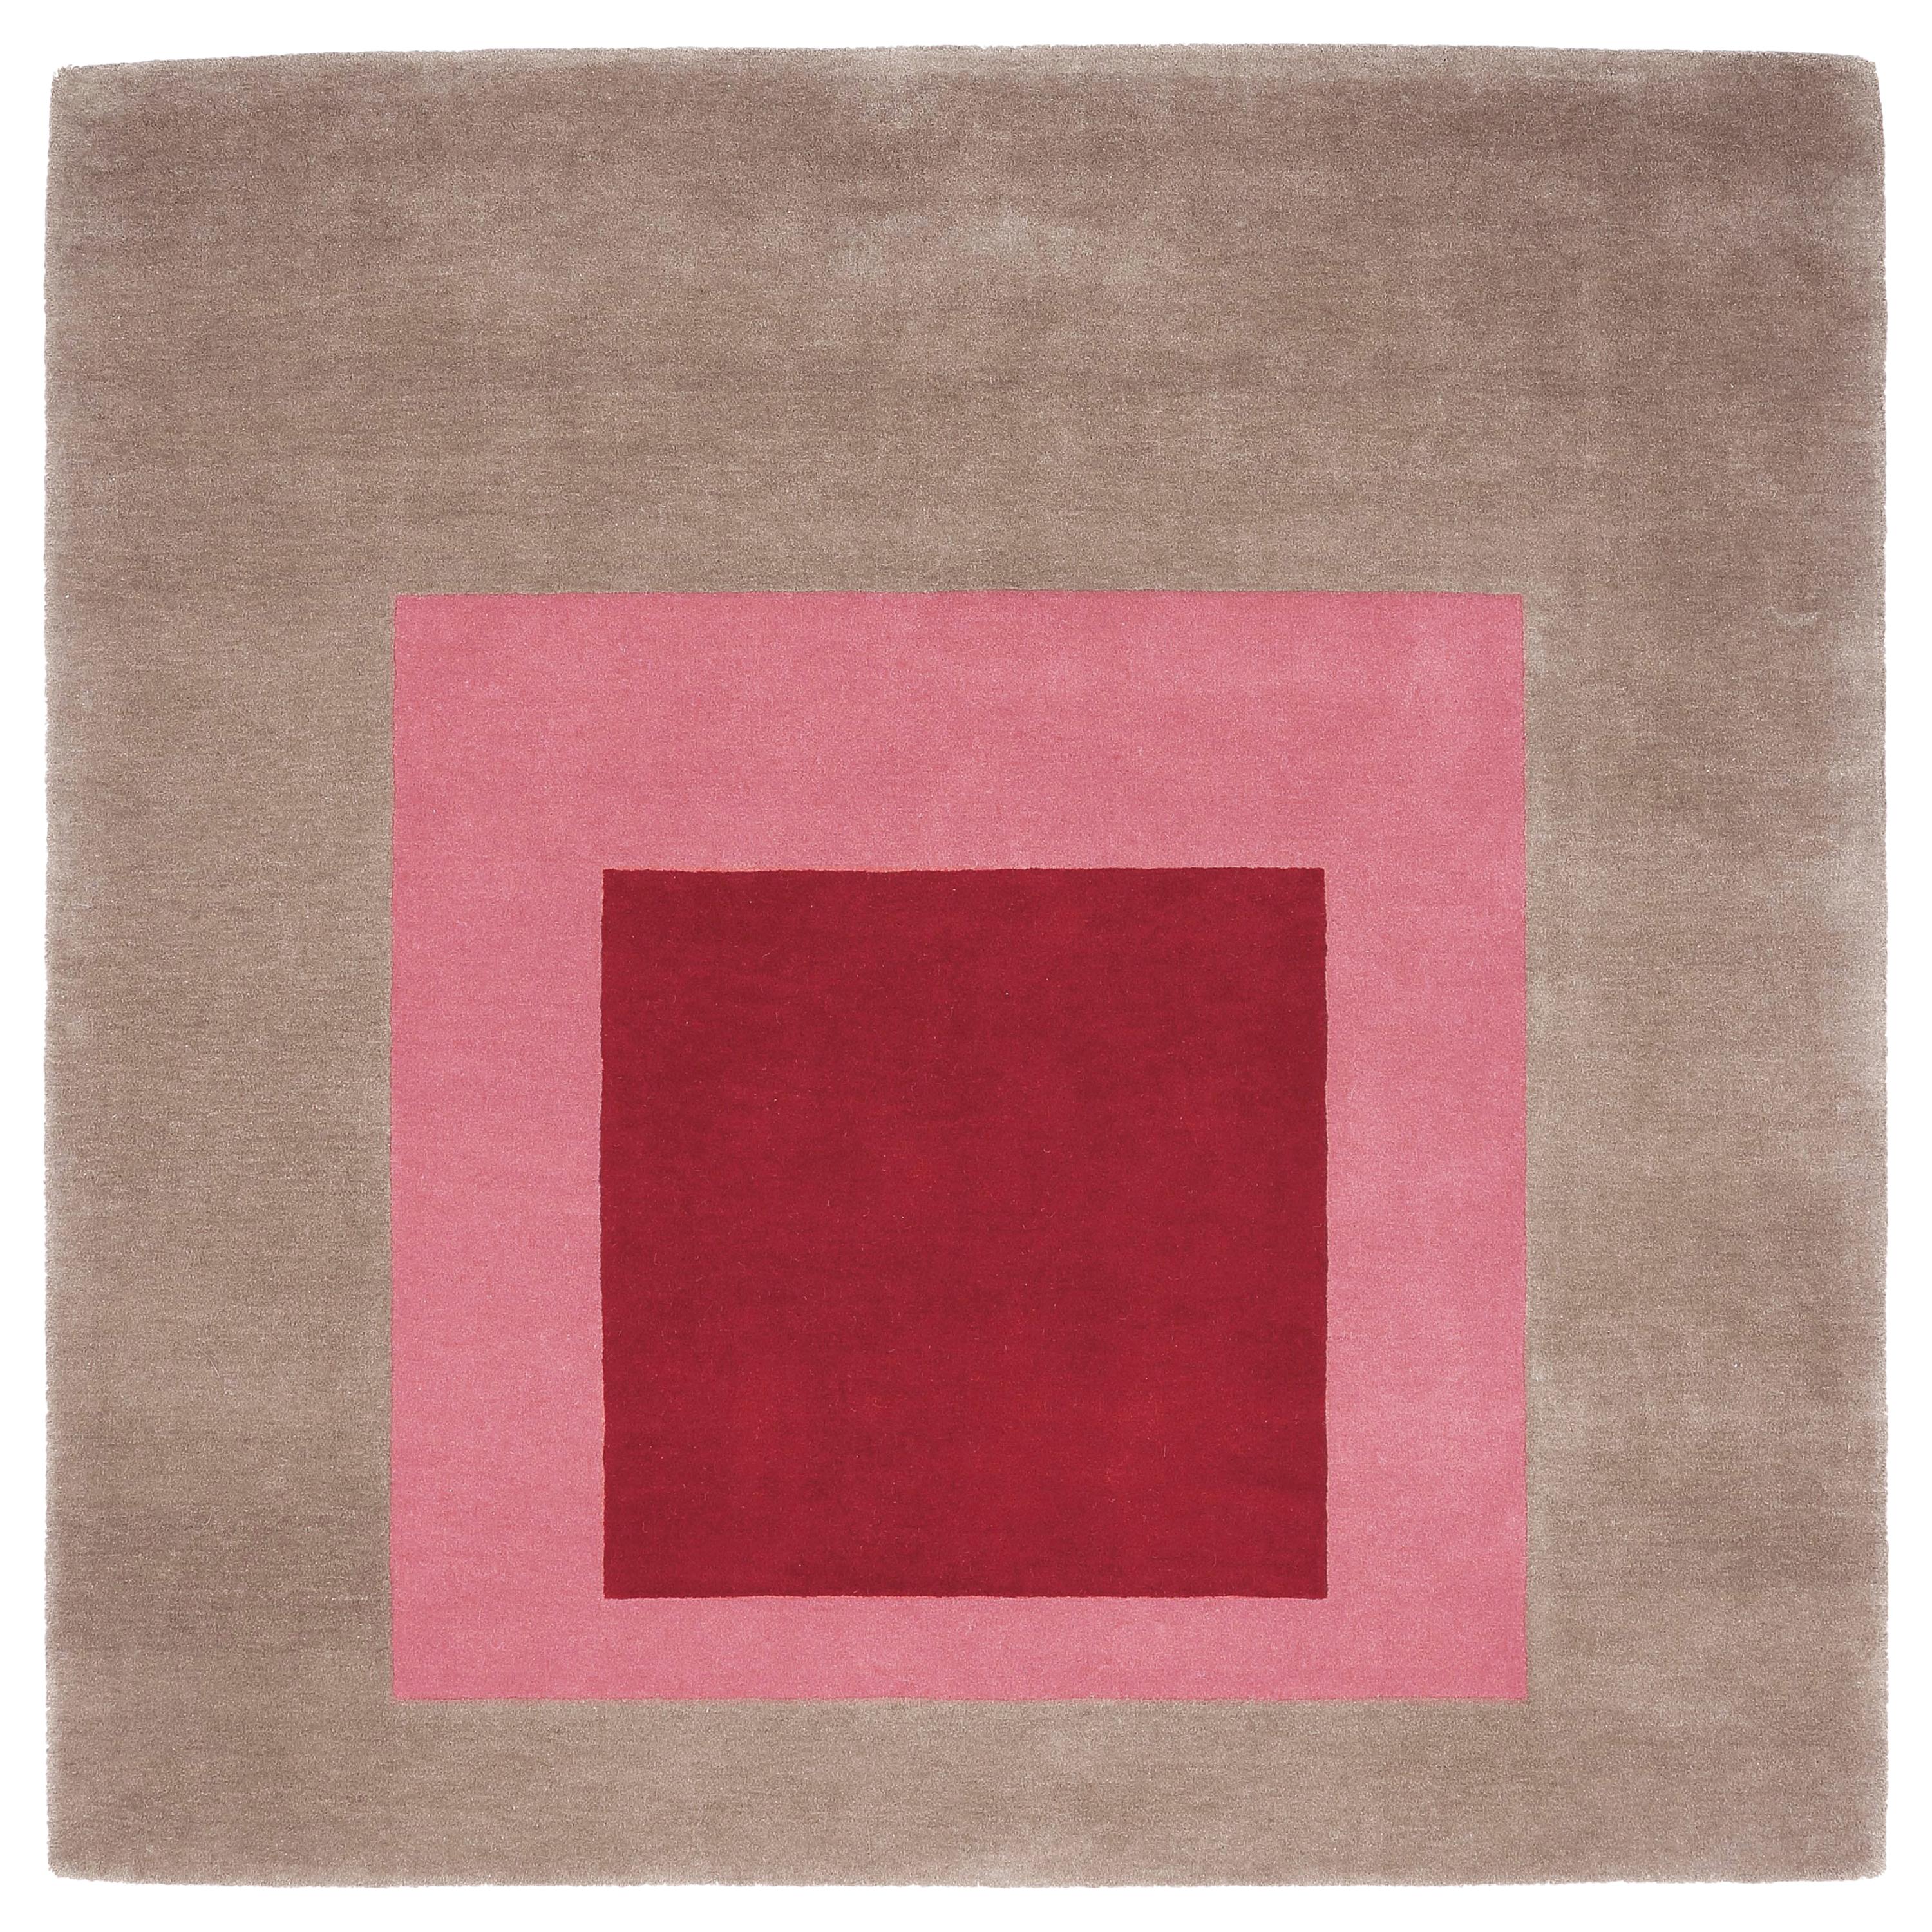 Homage to the Square Rug 'Beige/Pink/Burgundy' by Josef Albers For Sale